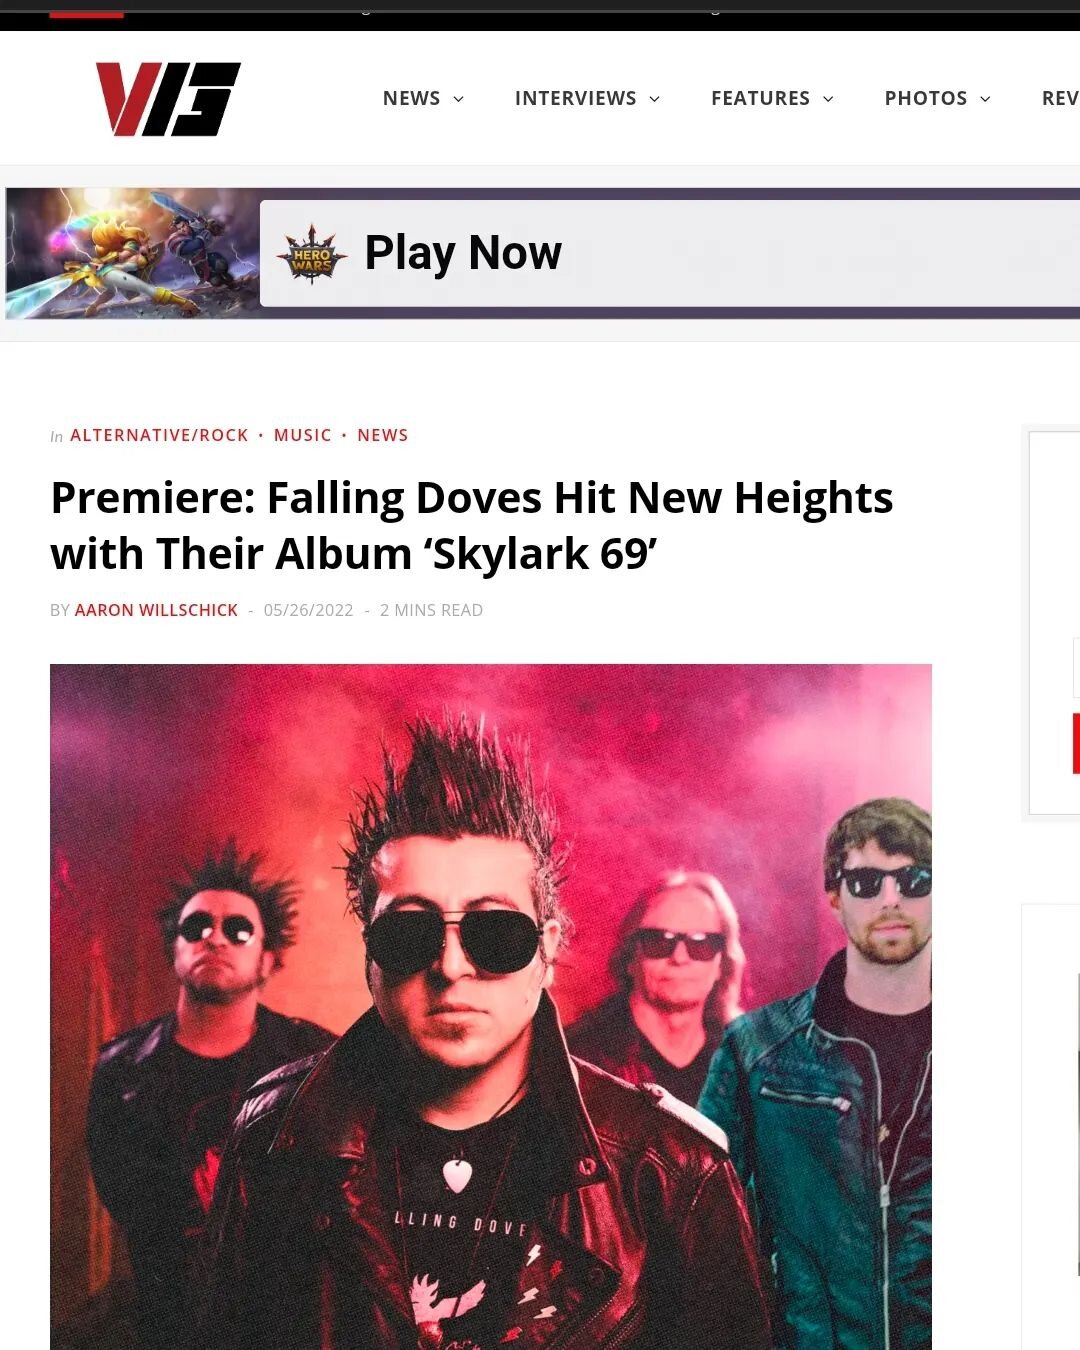 Thanks to the always fantastic @v13media for the debut of hollywood legends @fallingdovesmusic of @pacificrecords latest LP Skylark 69 the Falling Doves are currently bringing back rock n roll to the globe on their 2022 Double Vision World tour 🎸⚡